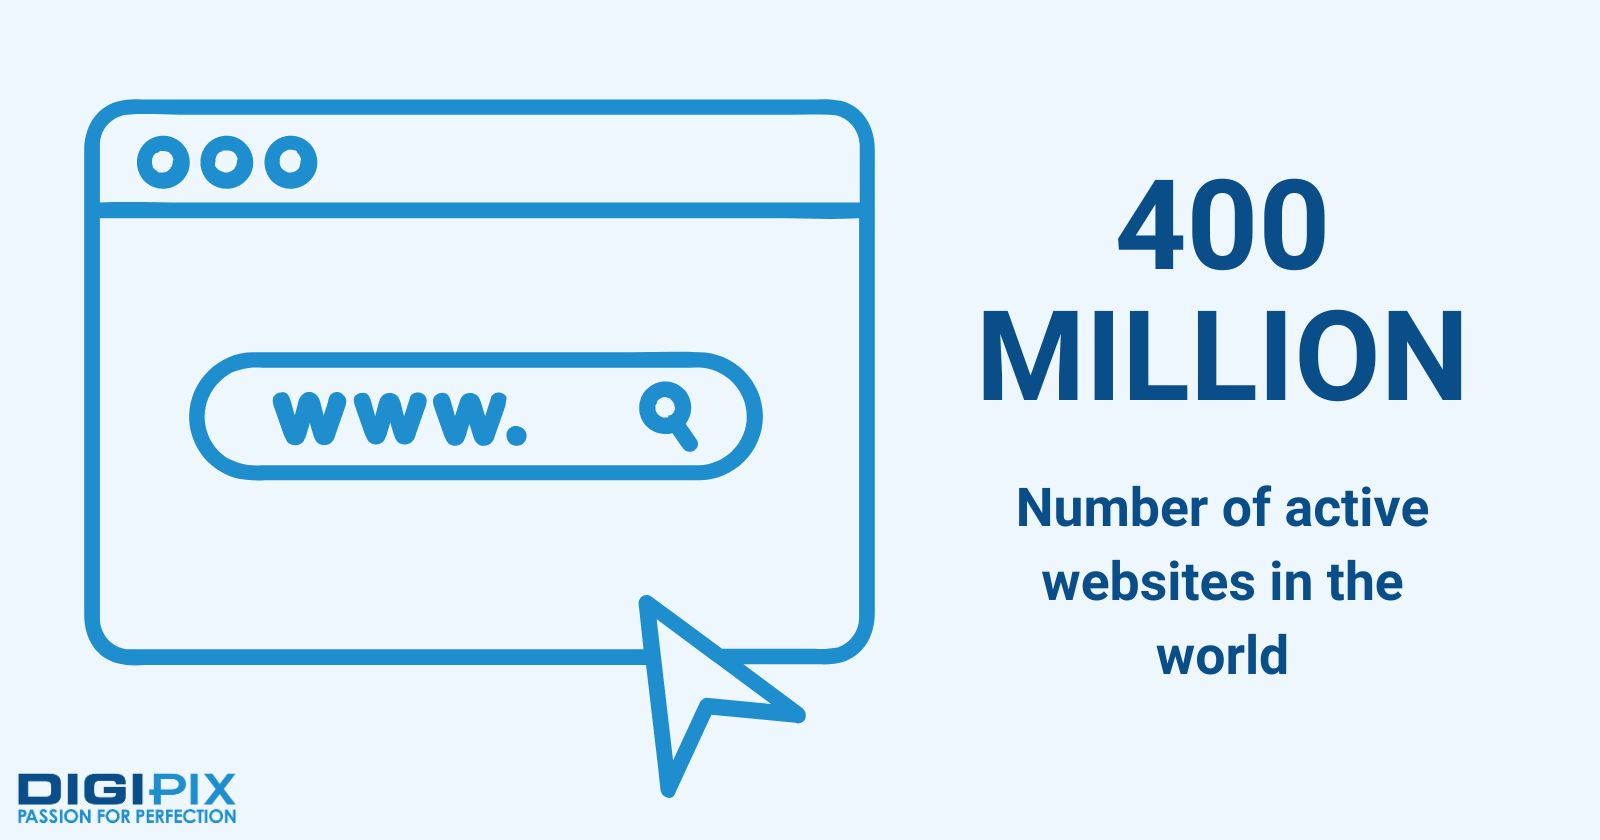 Stats indicated that there are 400 million active websites in the world